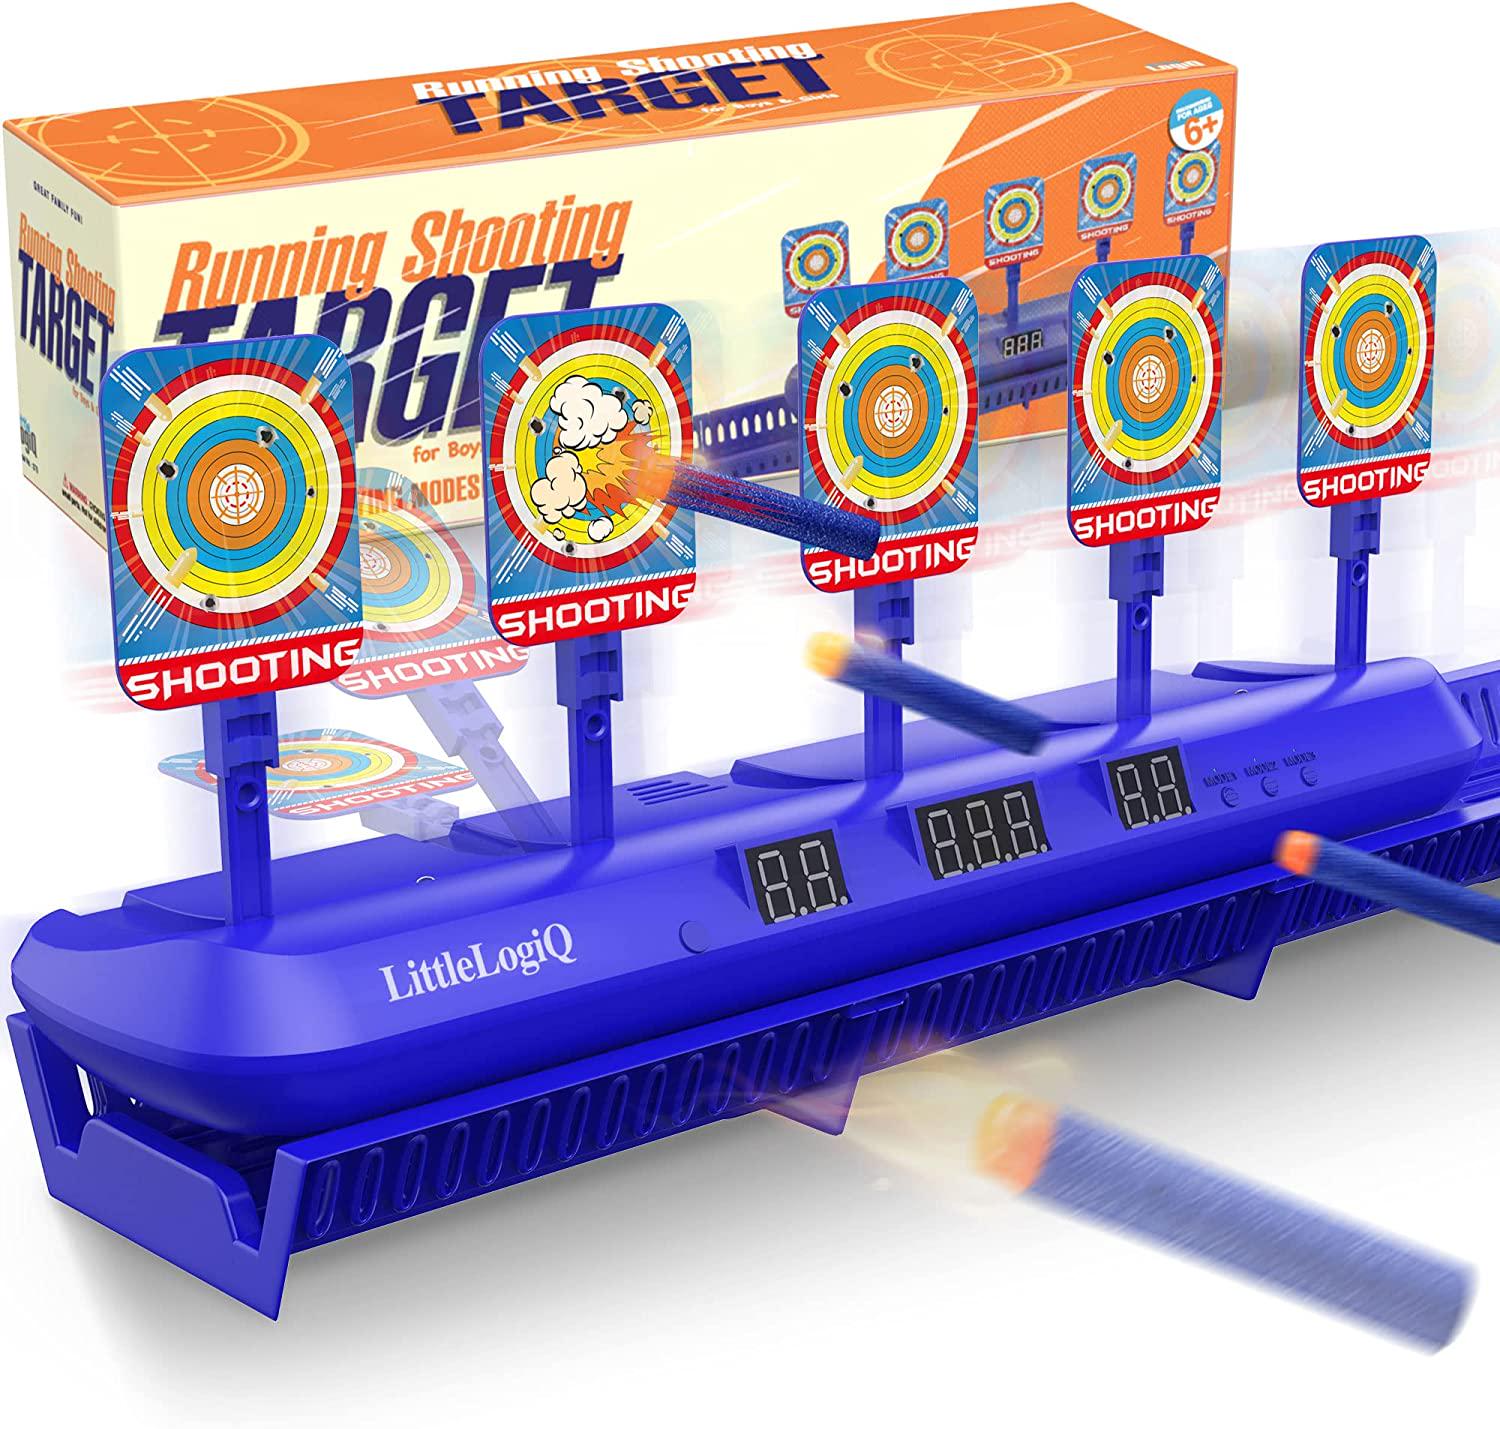 LITTLELOGIQ, LITTLELOGIQ Electronic Shooting Target, Toy for Age 5, 6, 7, 8, 9, 10+ Year Old Boys Girls, Gift Ideas for Kids, Target Shooting Games for Kids, Compatible with Nerf Foam Guns - Upgraded